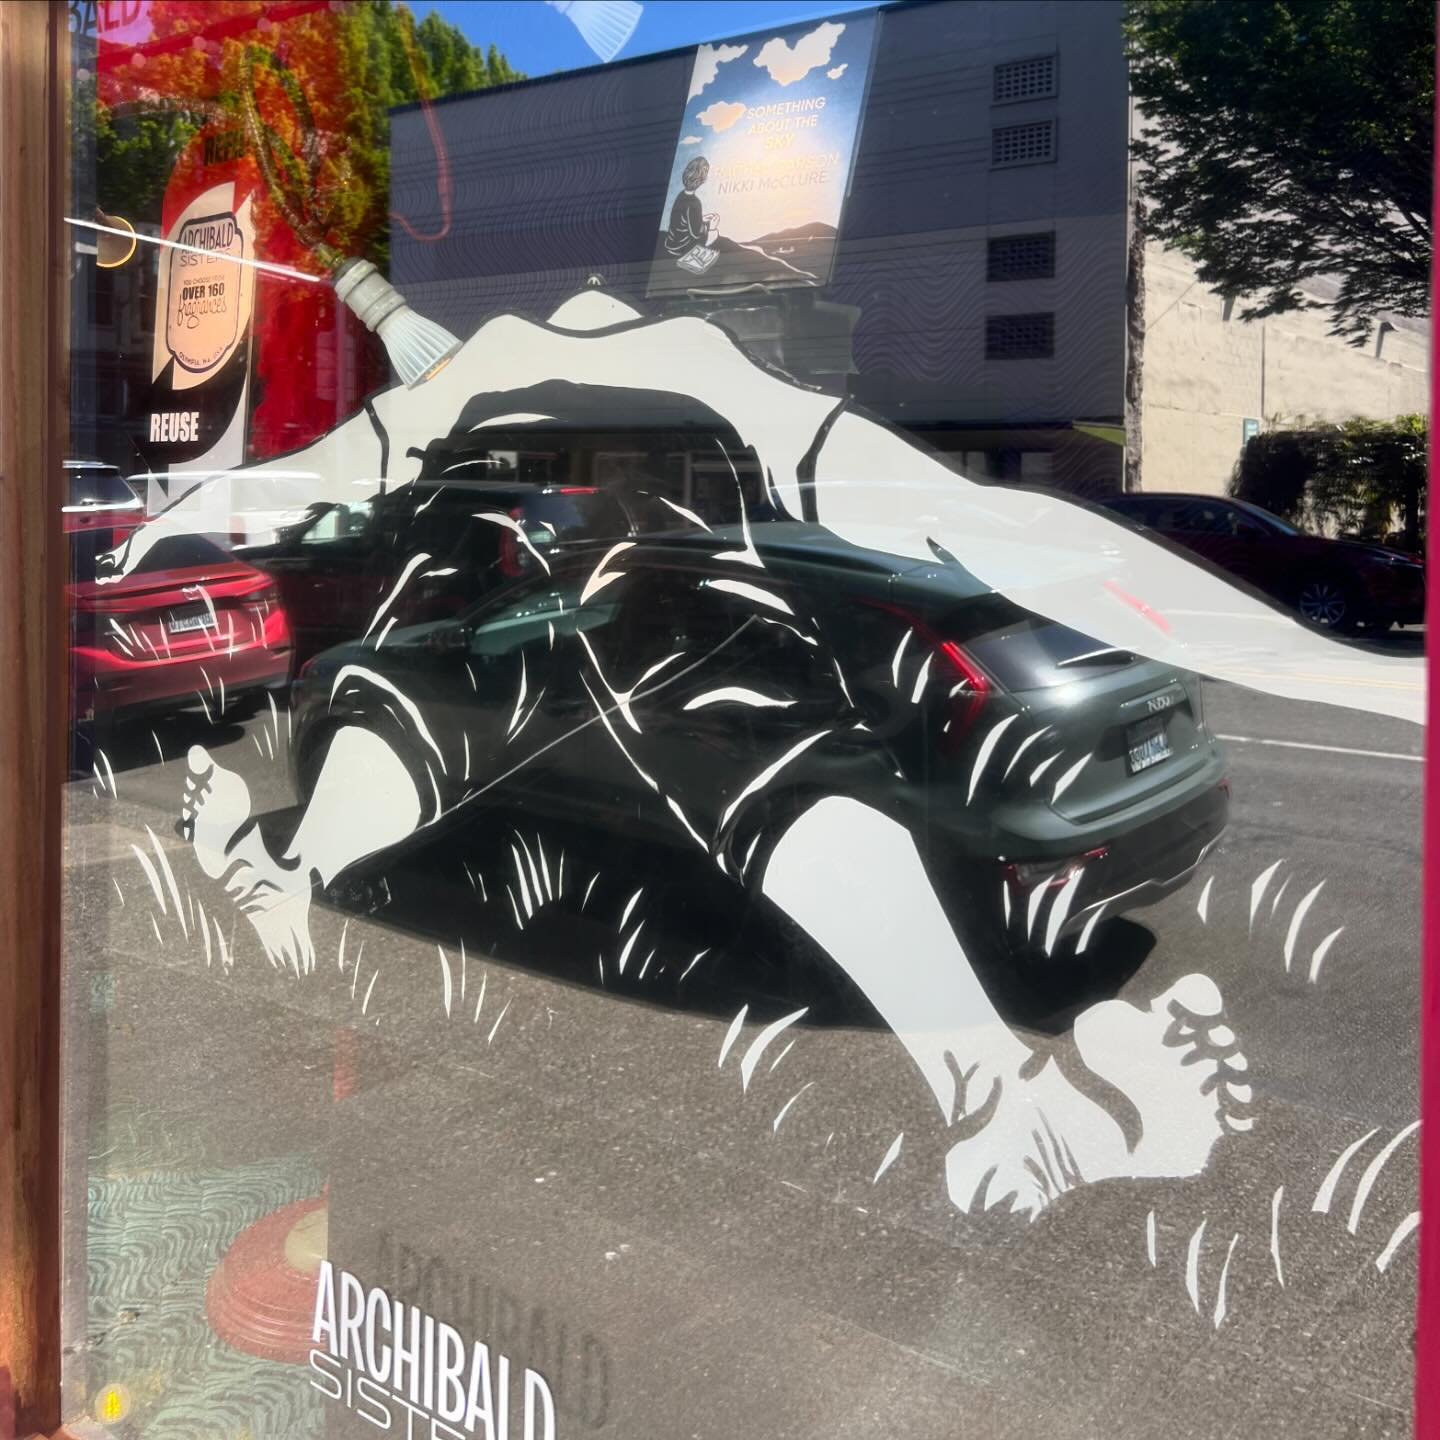 Downtown Olympia is busy today!  @archibaldsisters rocking the archives from when I&rsquo;d make window displays for them! And @browsersbooks if you need a cool spot to chill out and find a good cookbook for hot days.